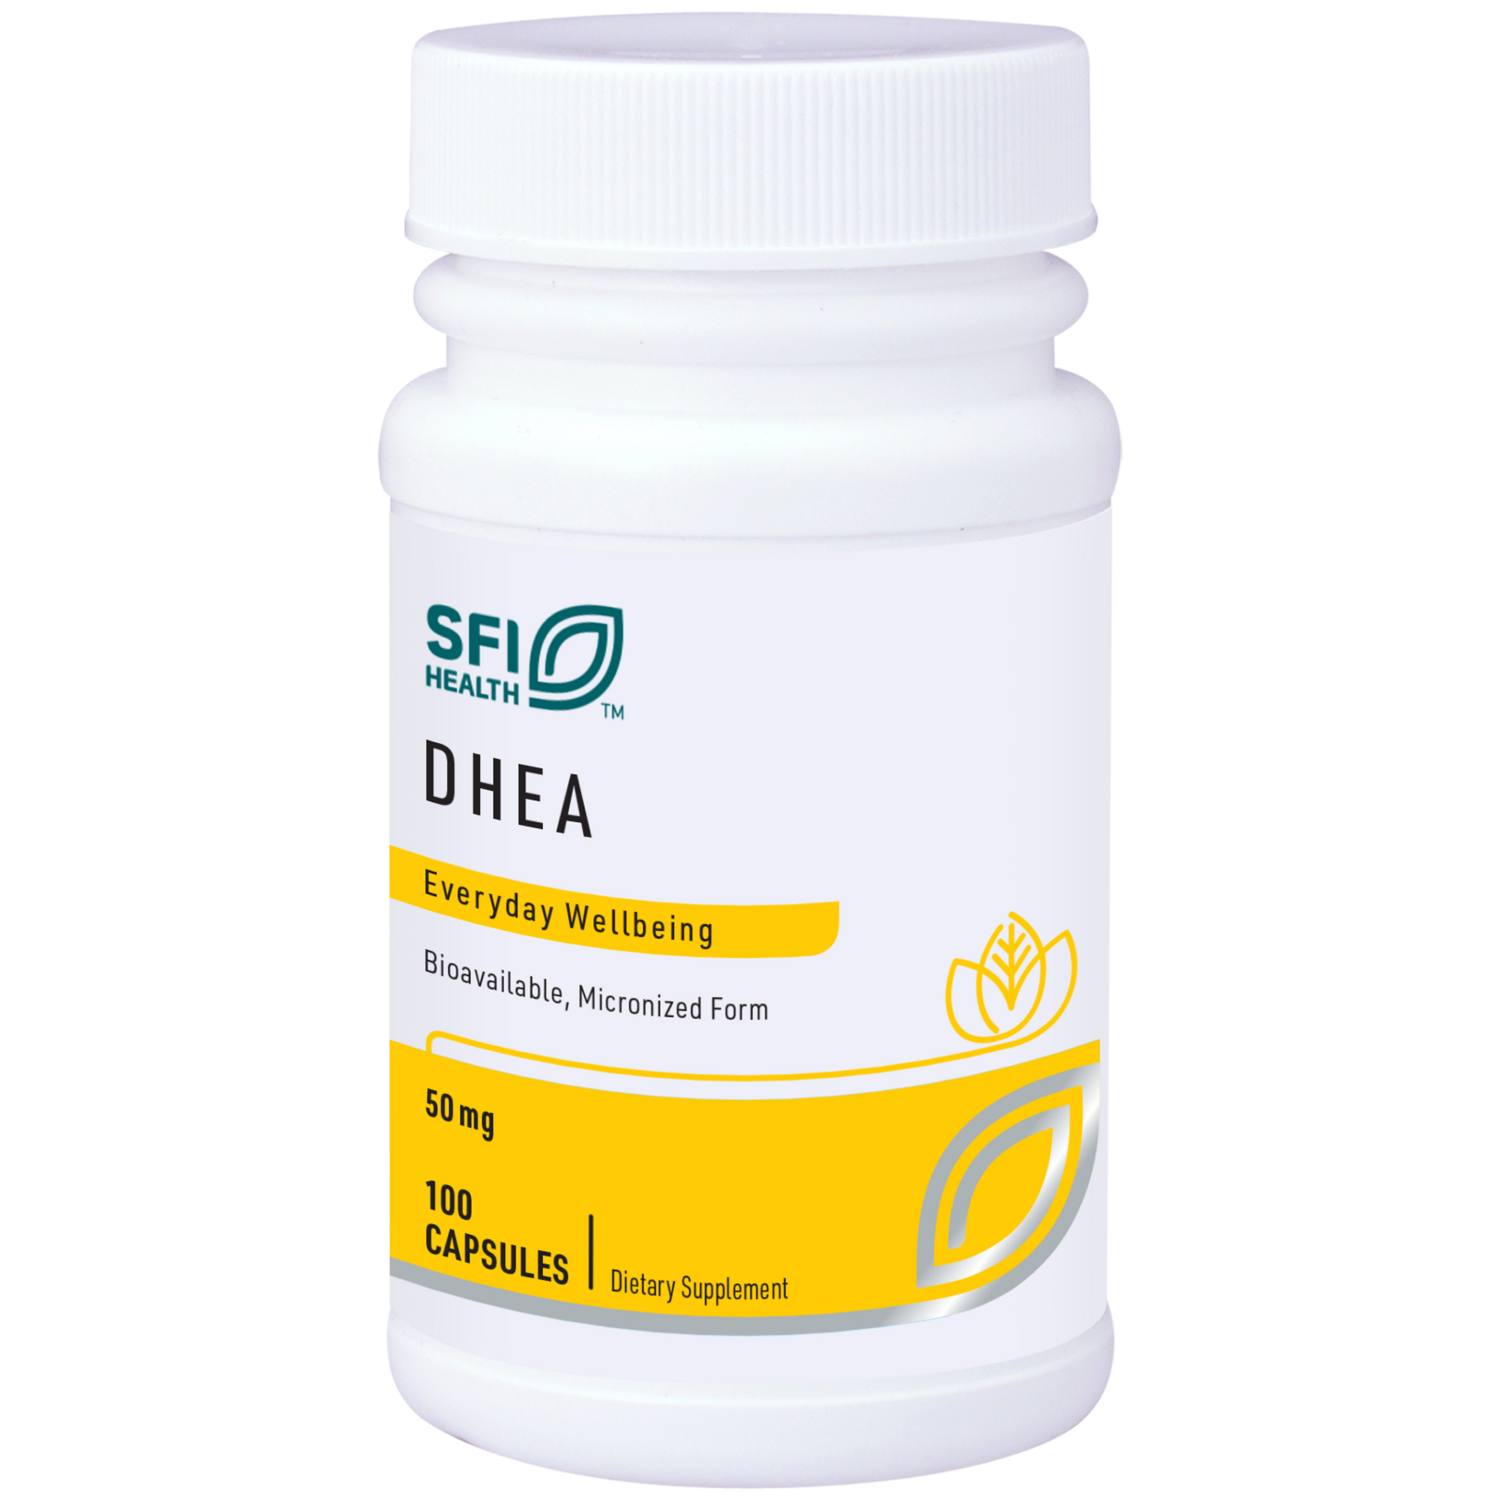 DHEA 50 MG 100 CAPSULES Klaire Labs